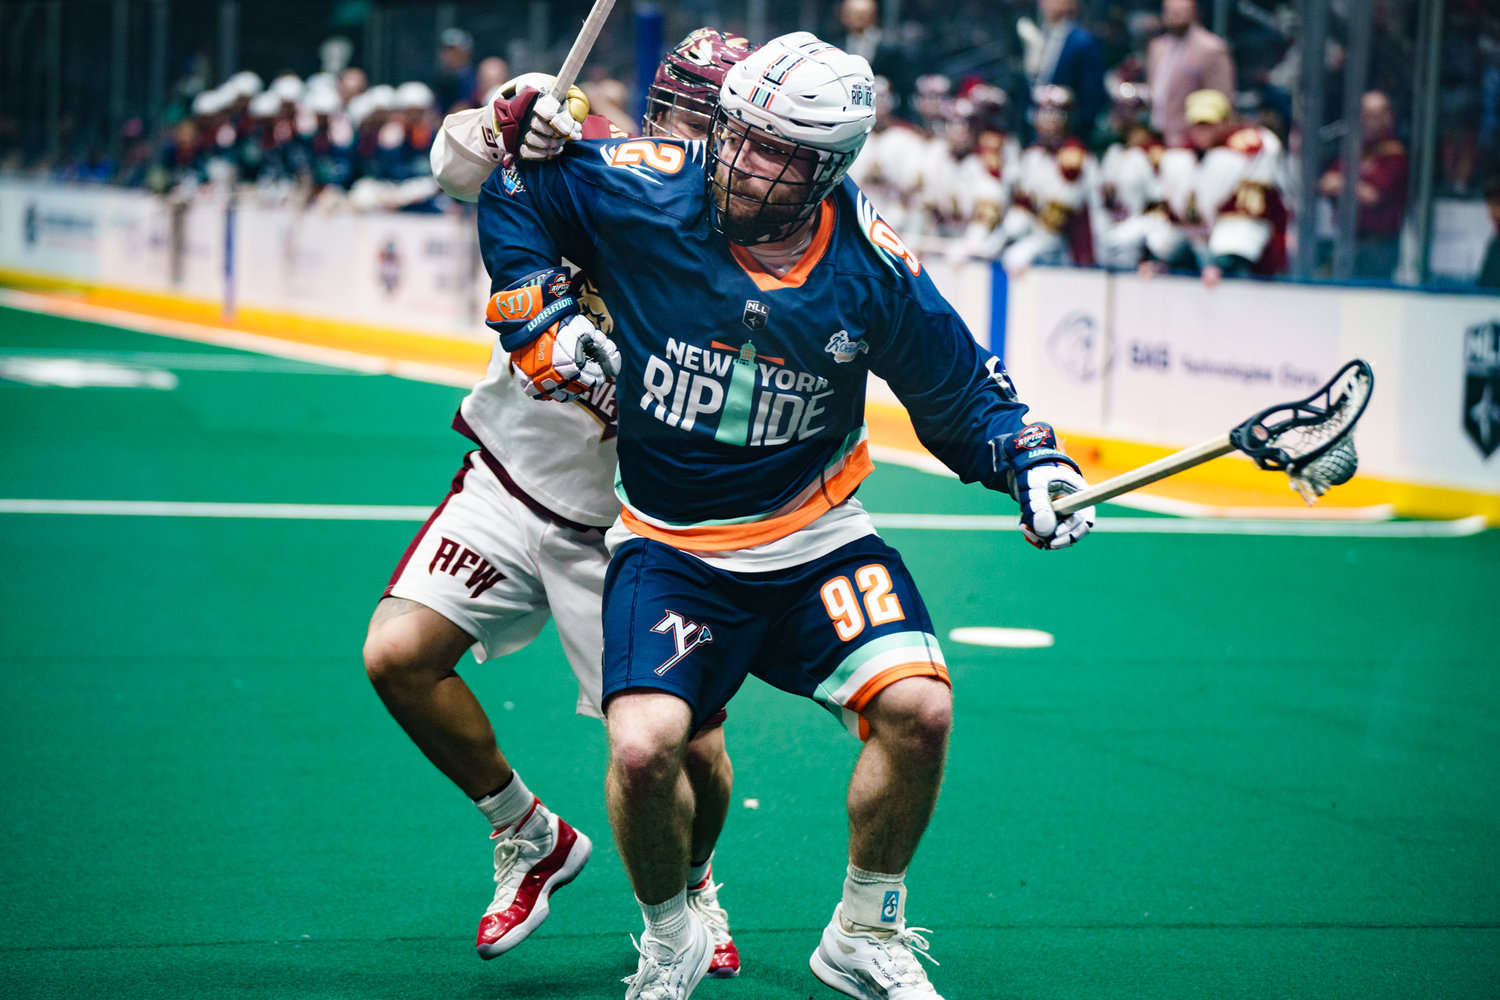 Connon Kearnan stayed hot for the Riptide with four goals in Saturday's 13-10 victory over Albany at Nassau Coliseum.